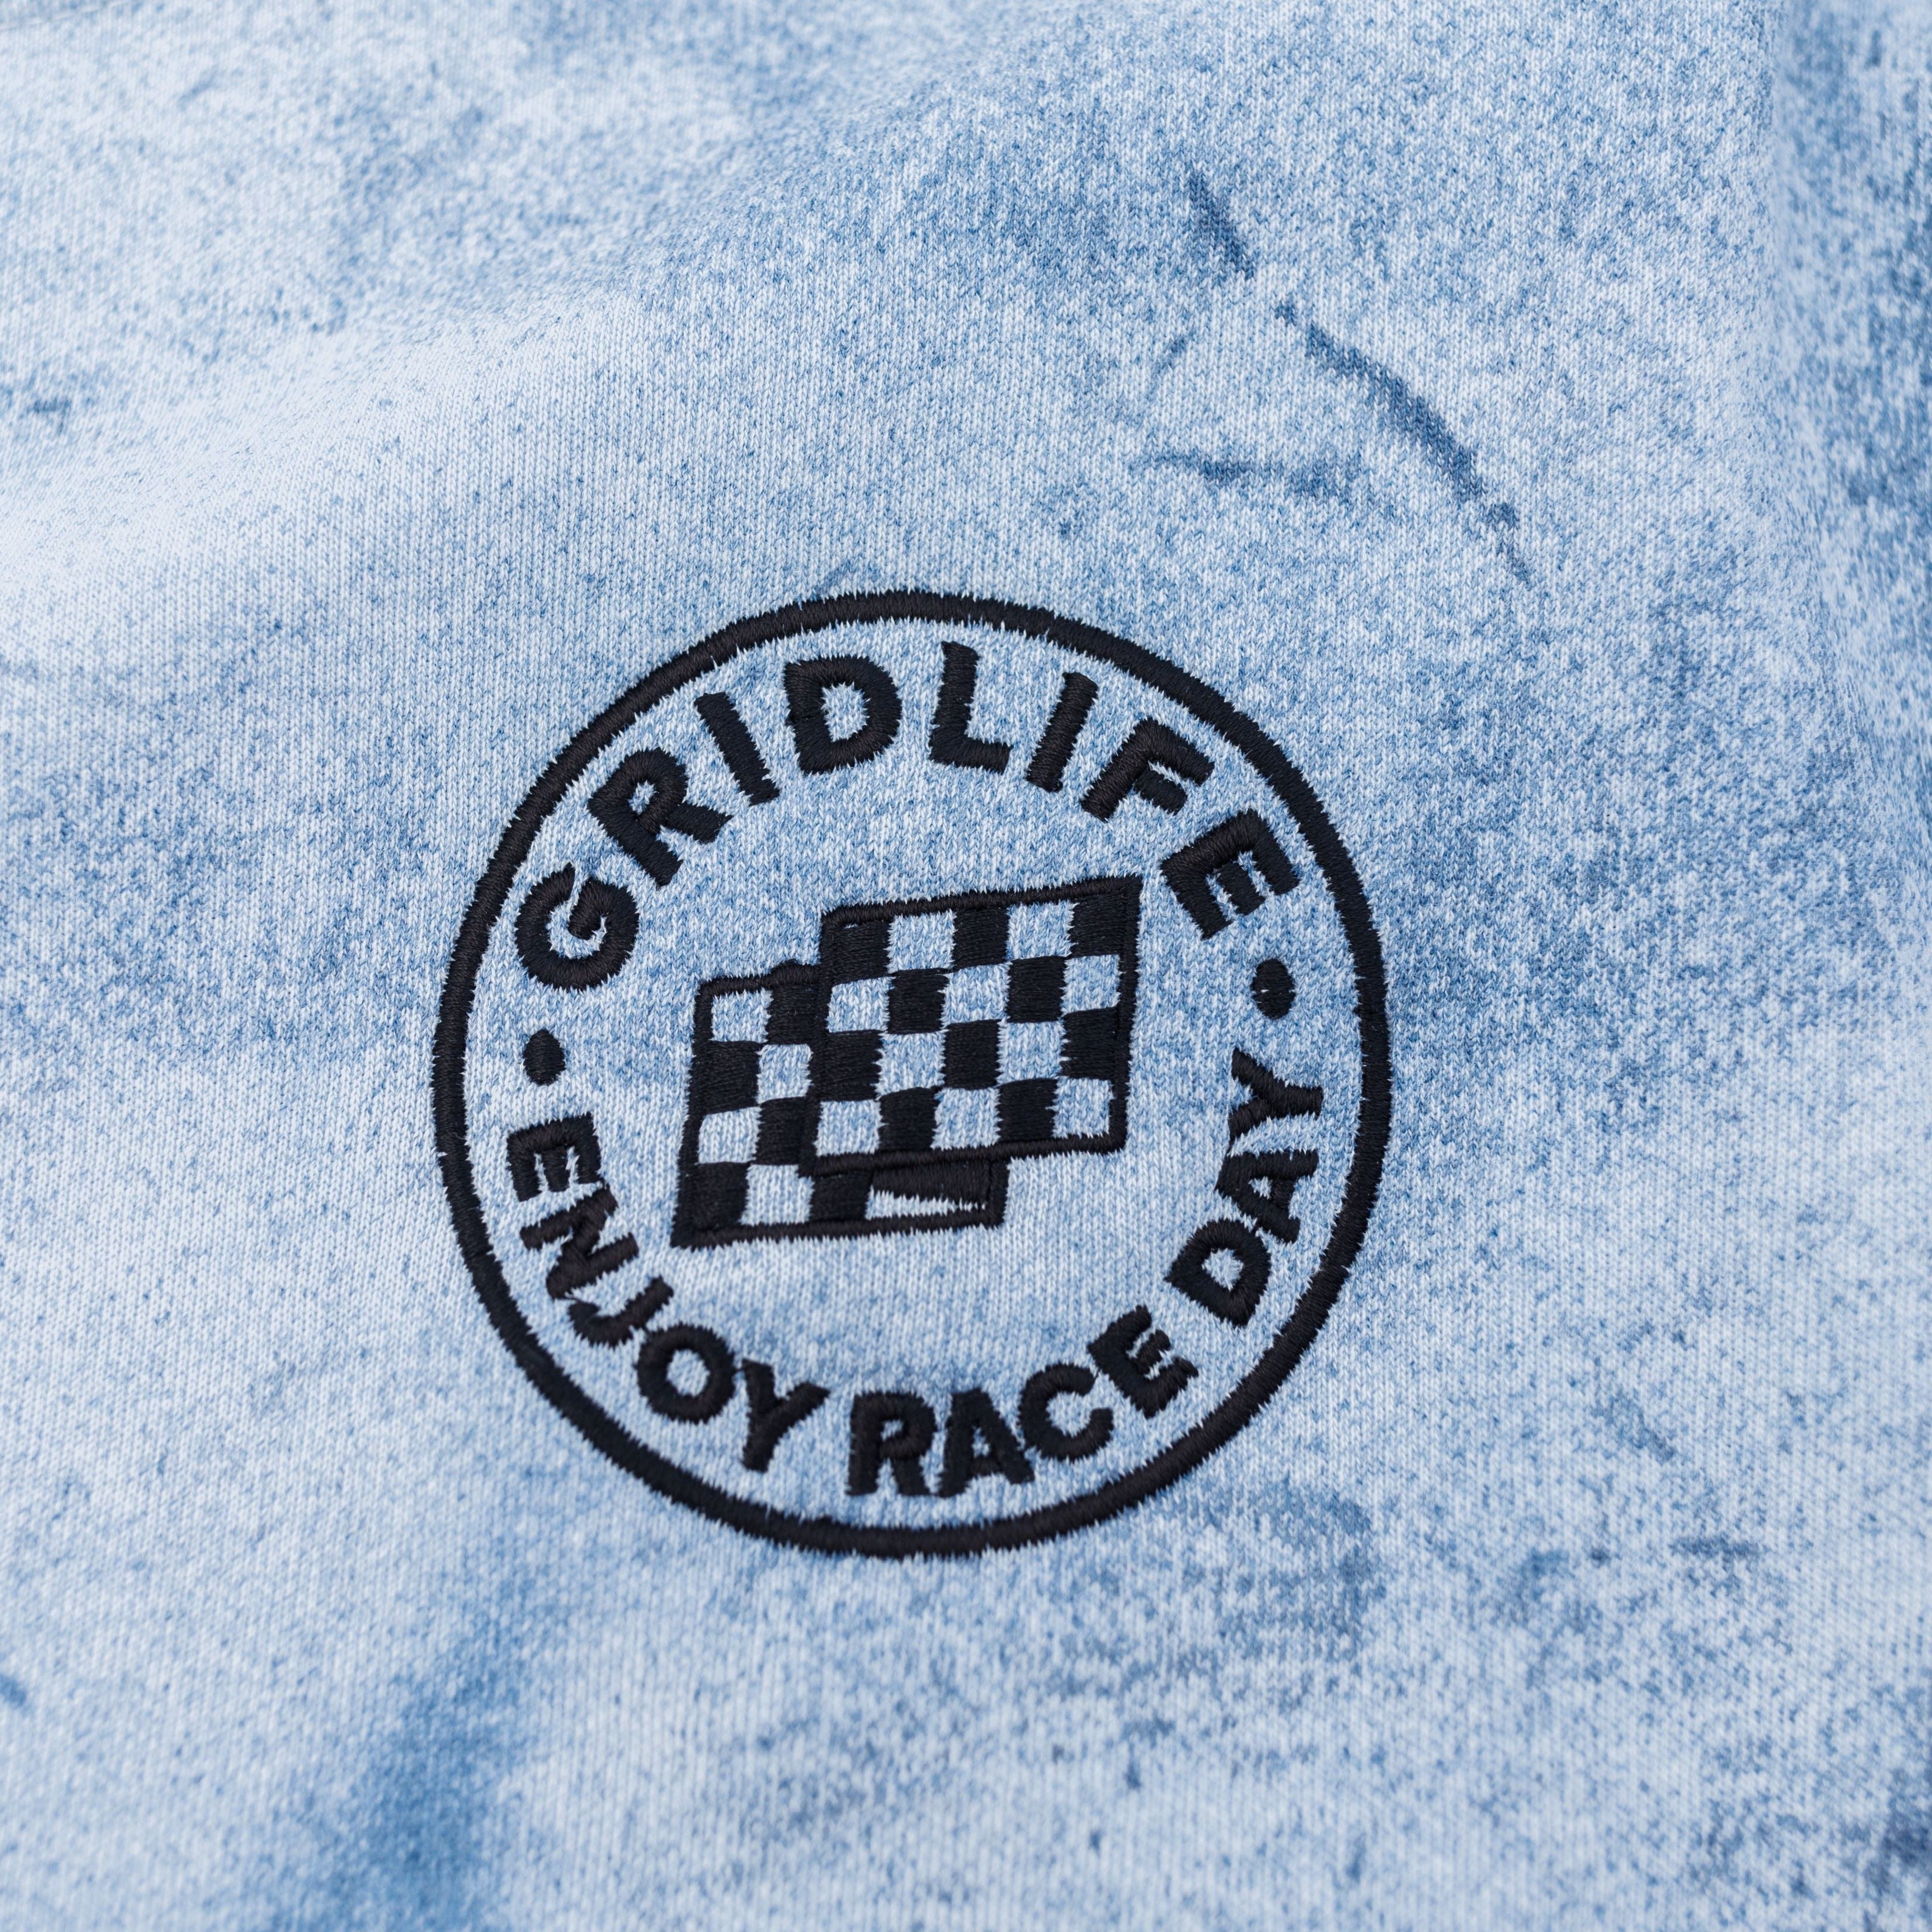 Close up of the Embroidered logo on the GRIDLIFE Enjoy Race Day crewneck 